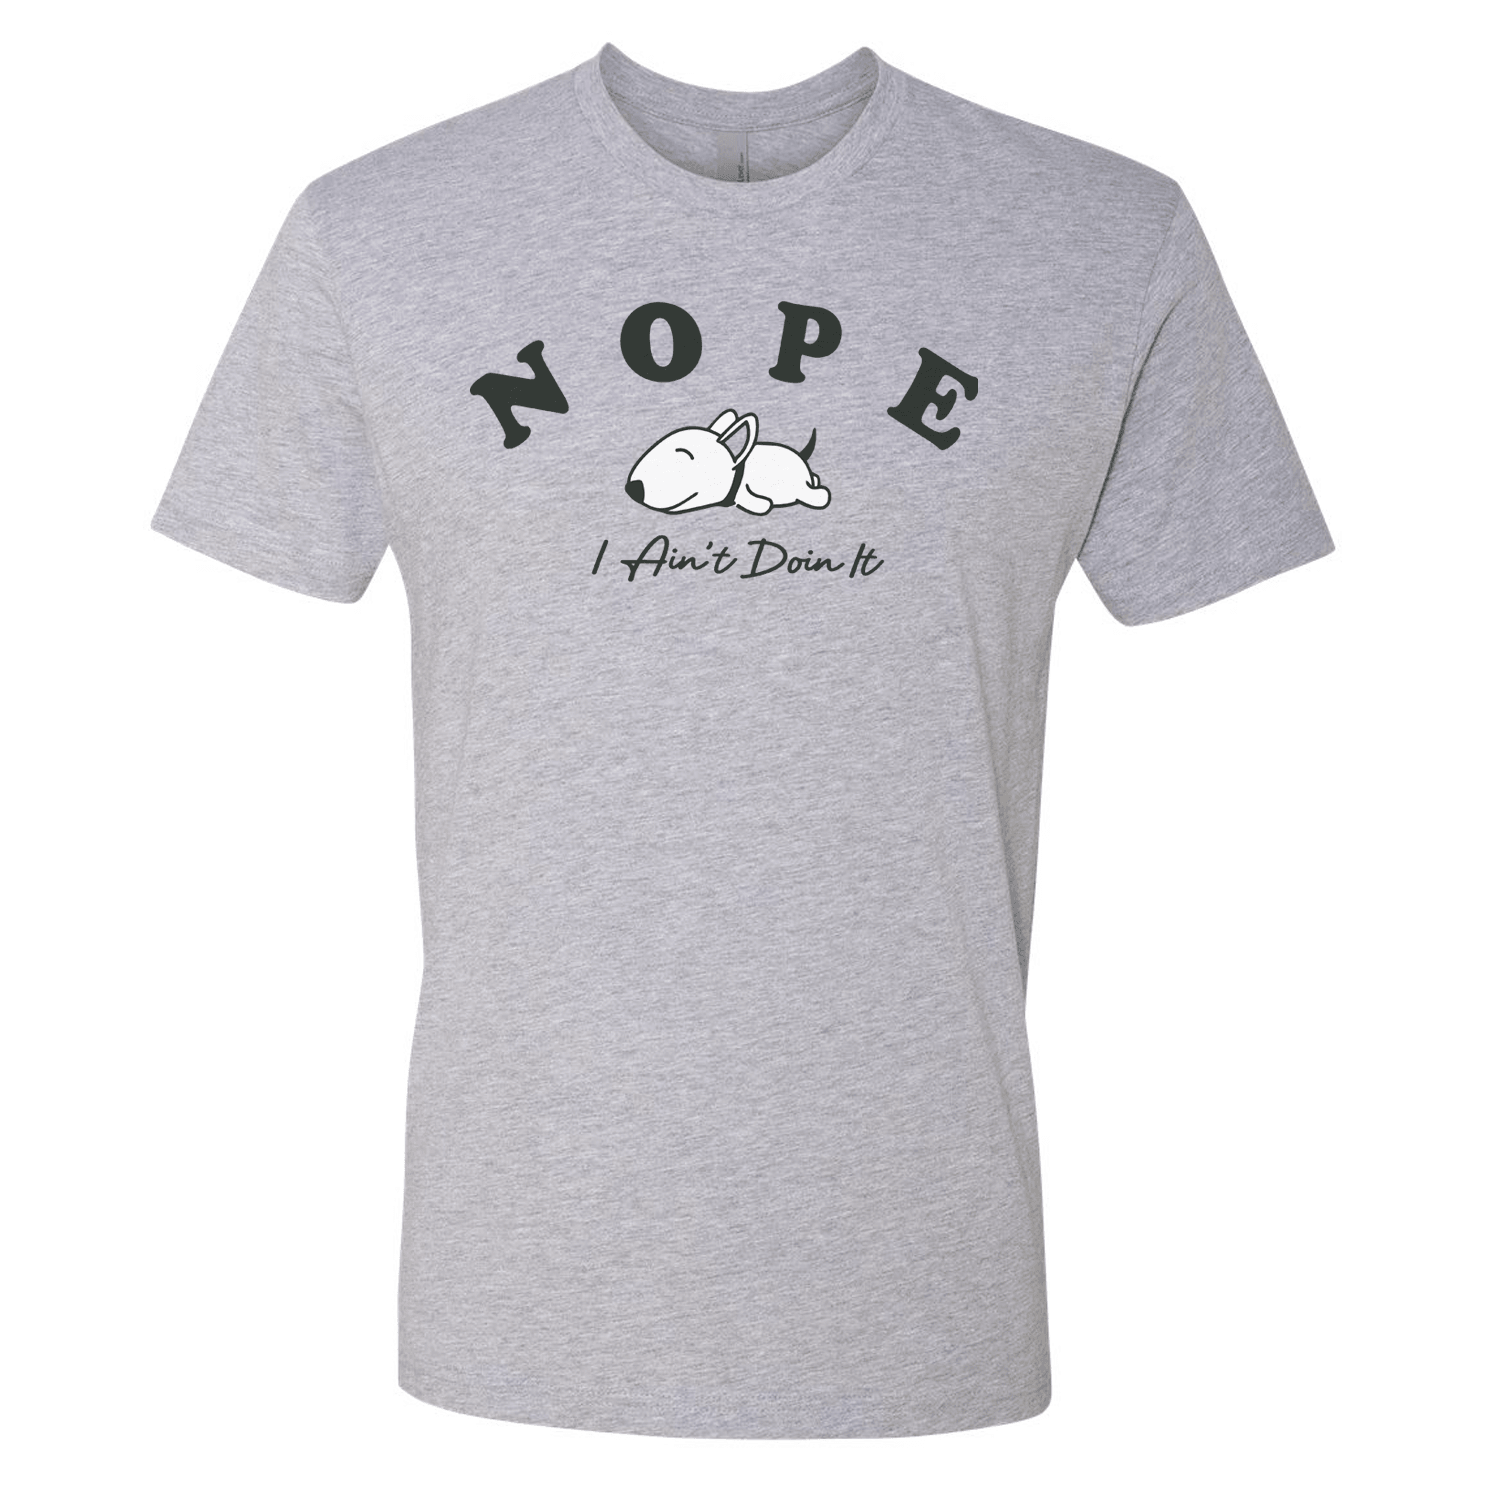 Nope I aint doing it T-Shirt - Ales to Trails